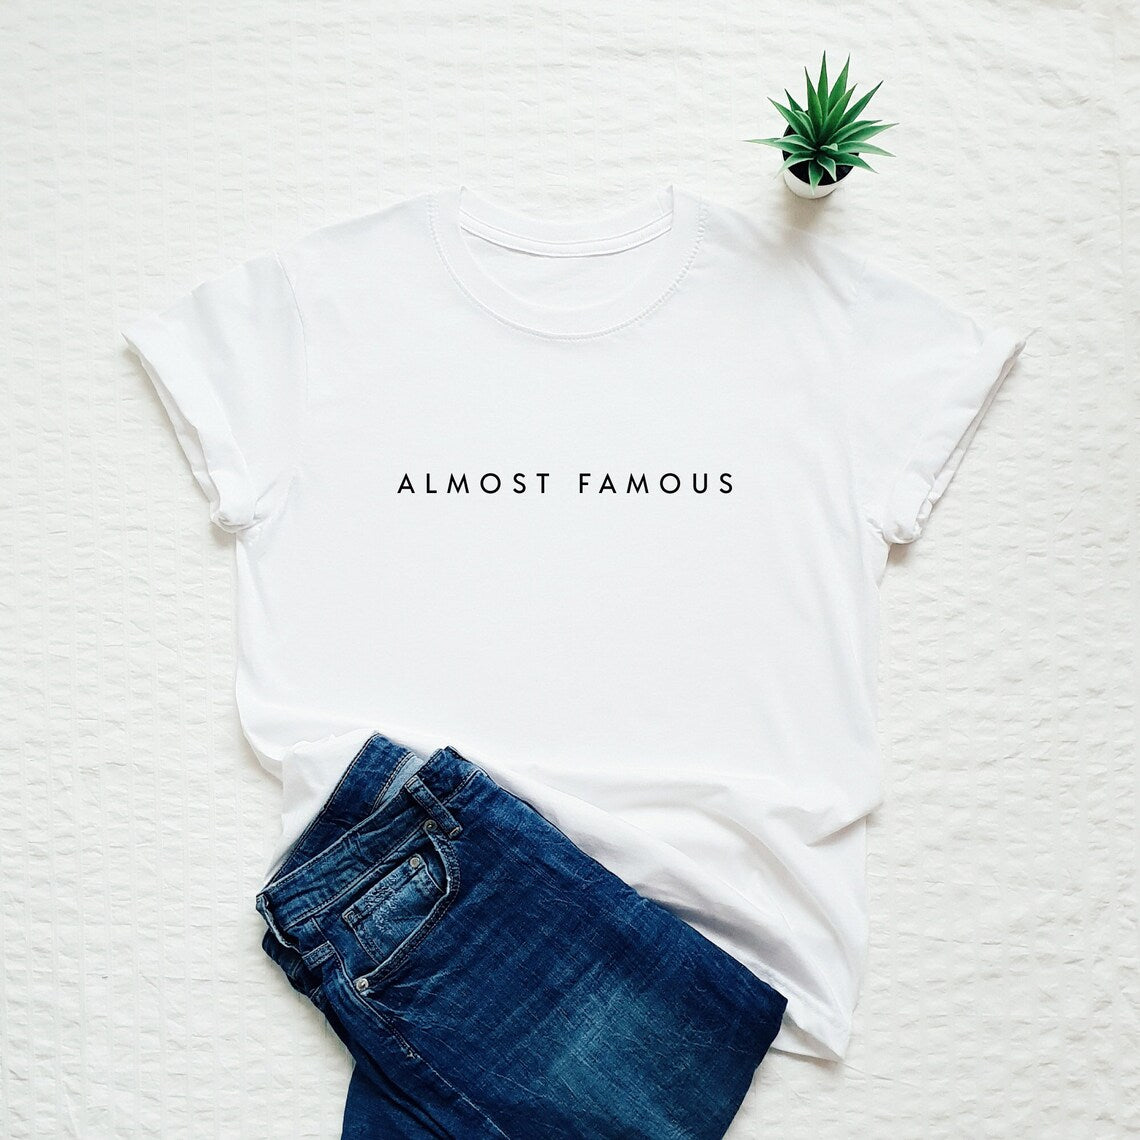 Almost Famous Printed Unisex T-Shirt